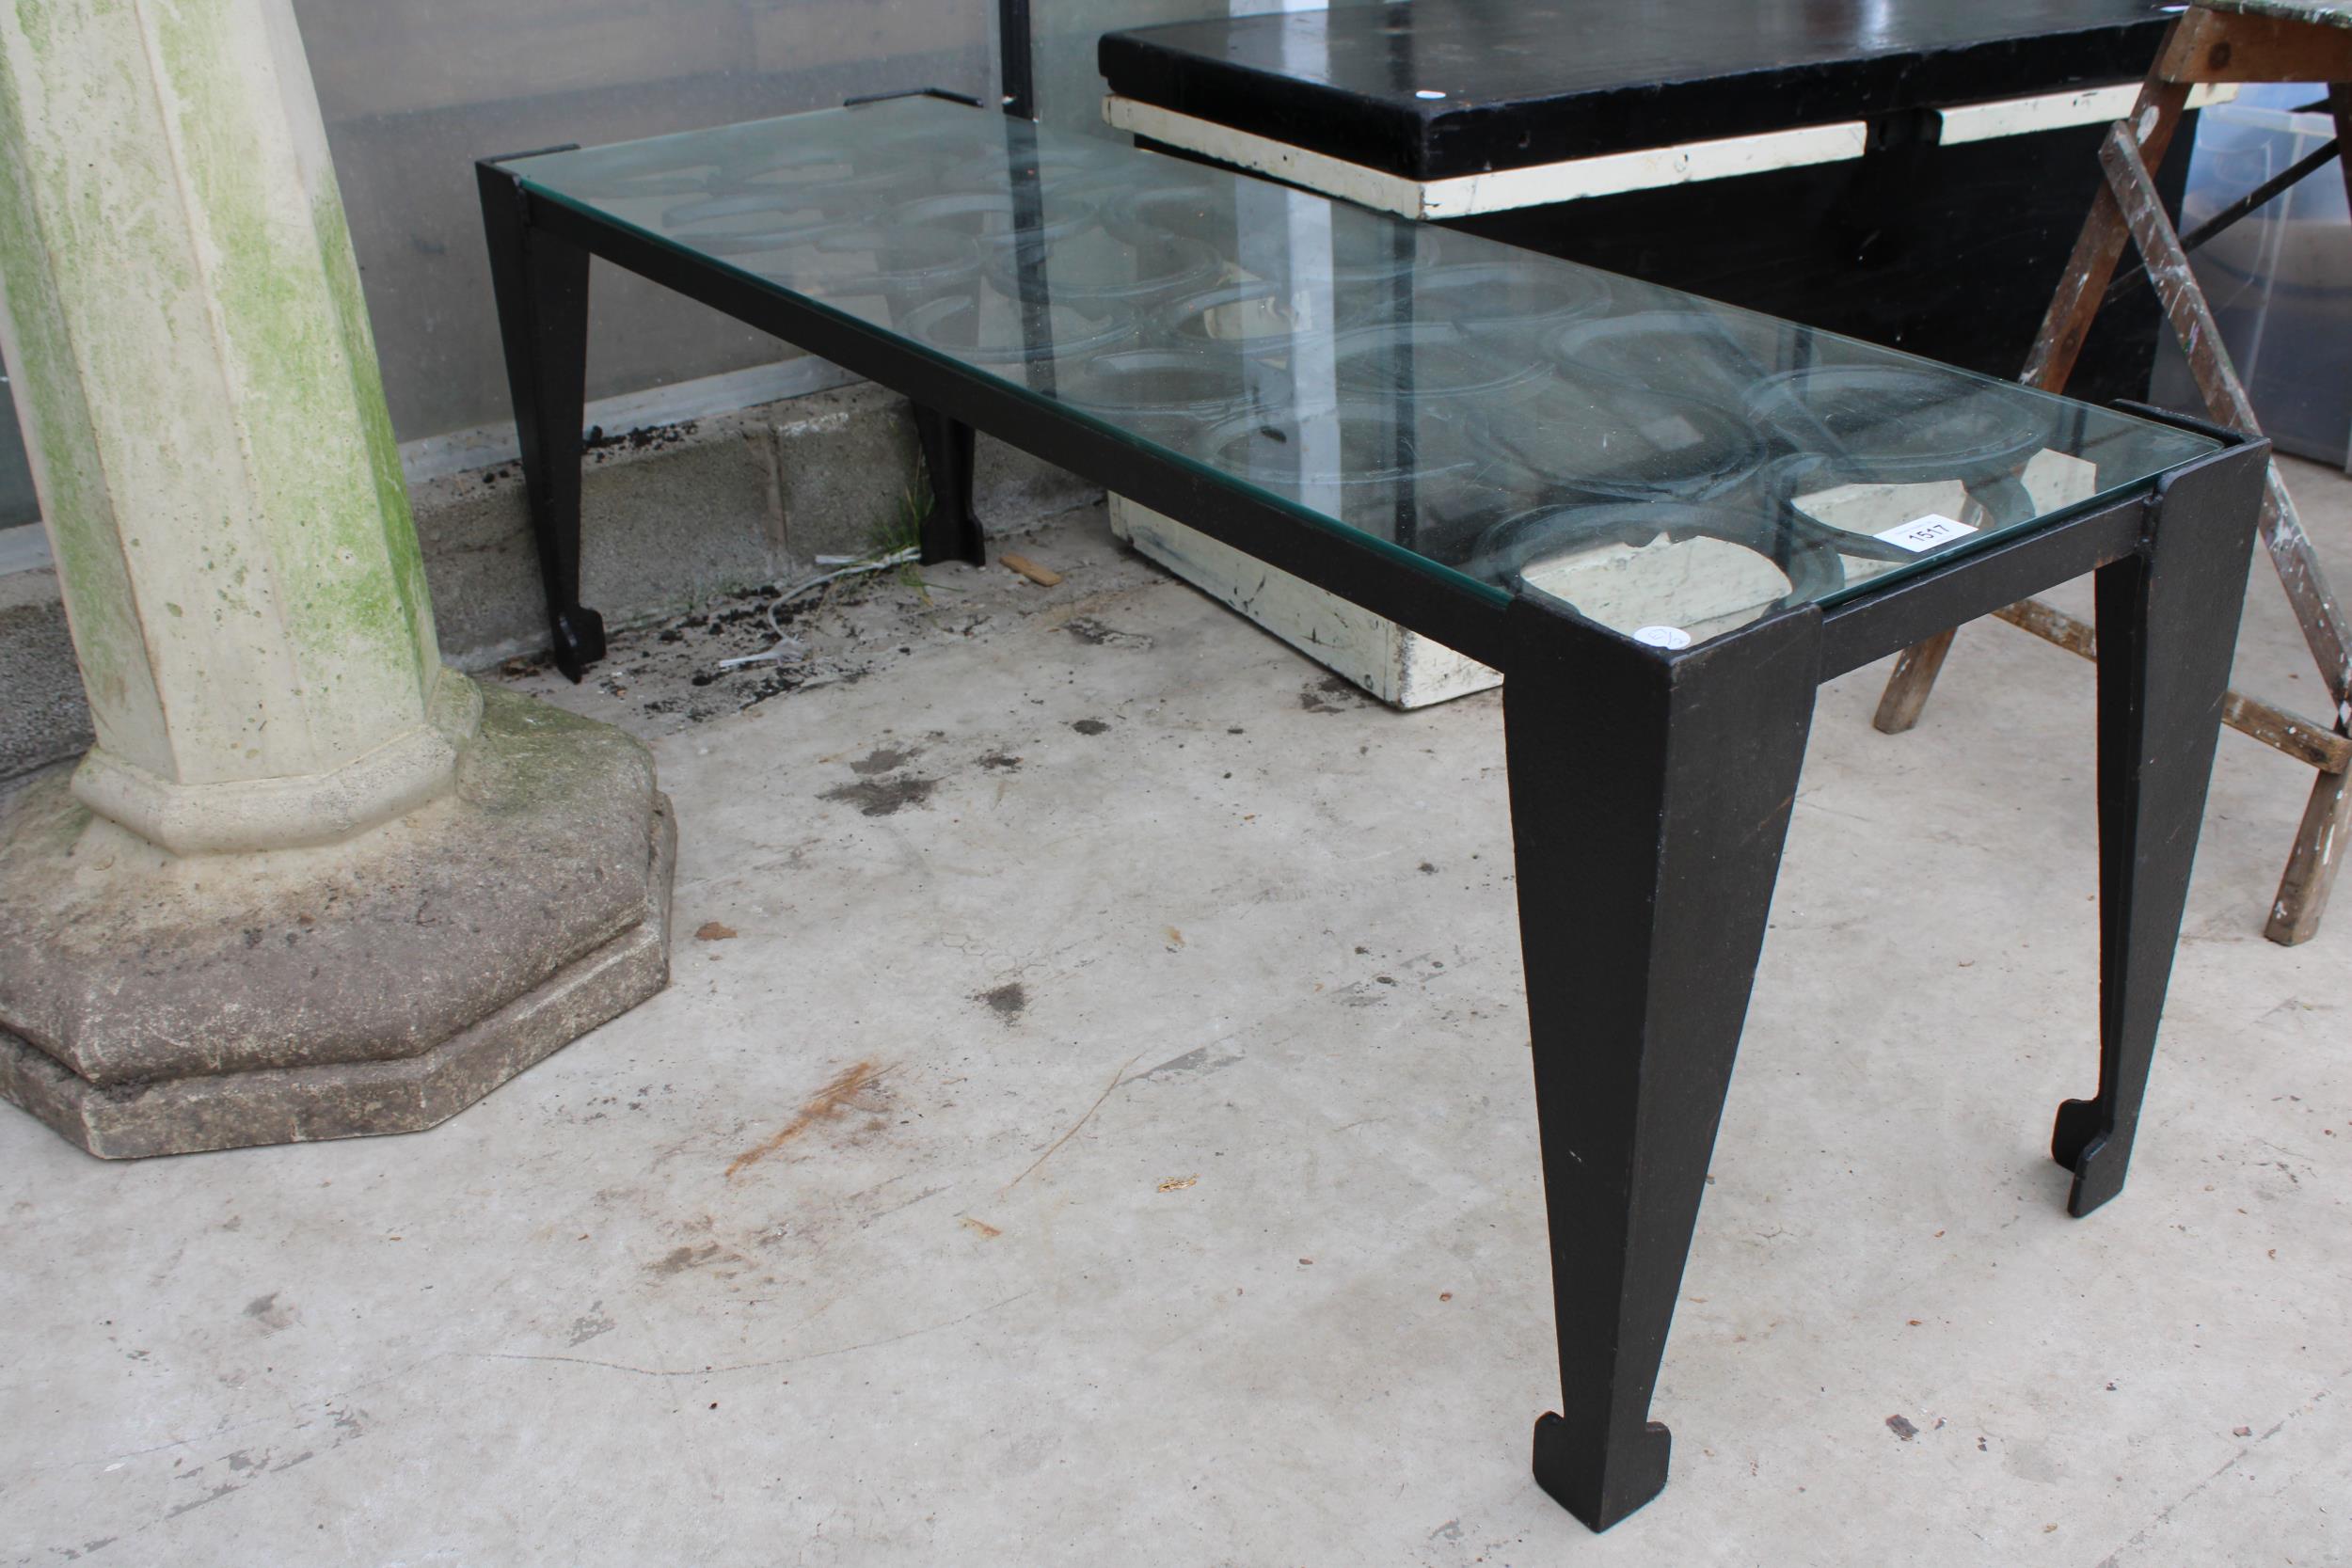 A VINTAGE STYLE METAL COFFEE TABLE WITH GLASS TOP AND FORMED FROM HORSE SHOES - Image 2 of 4